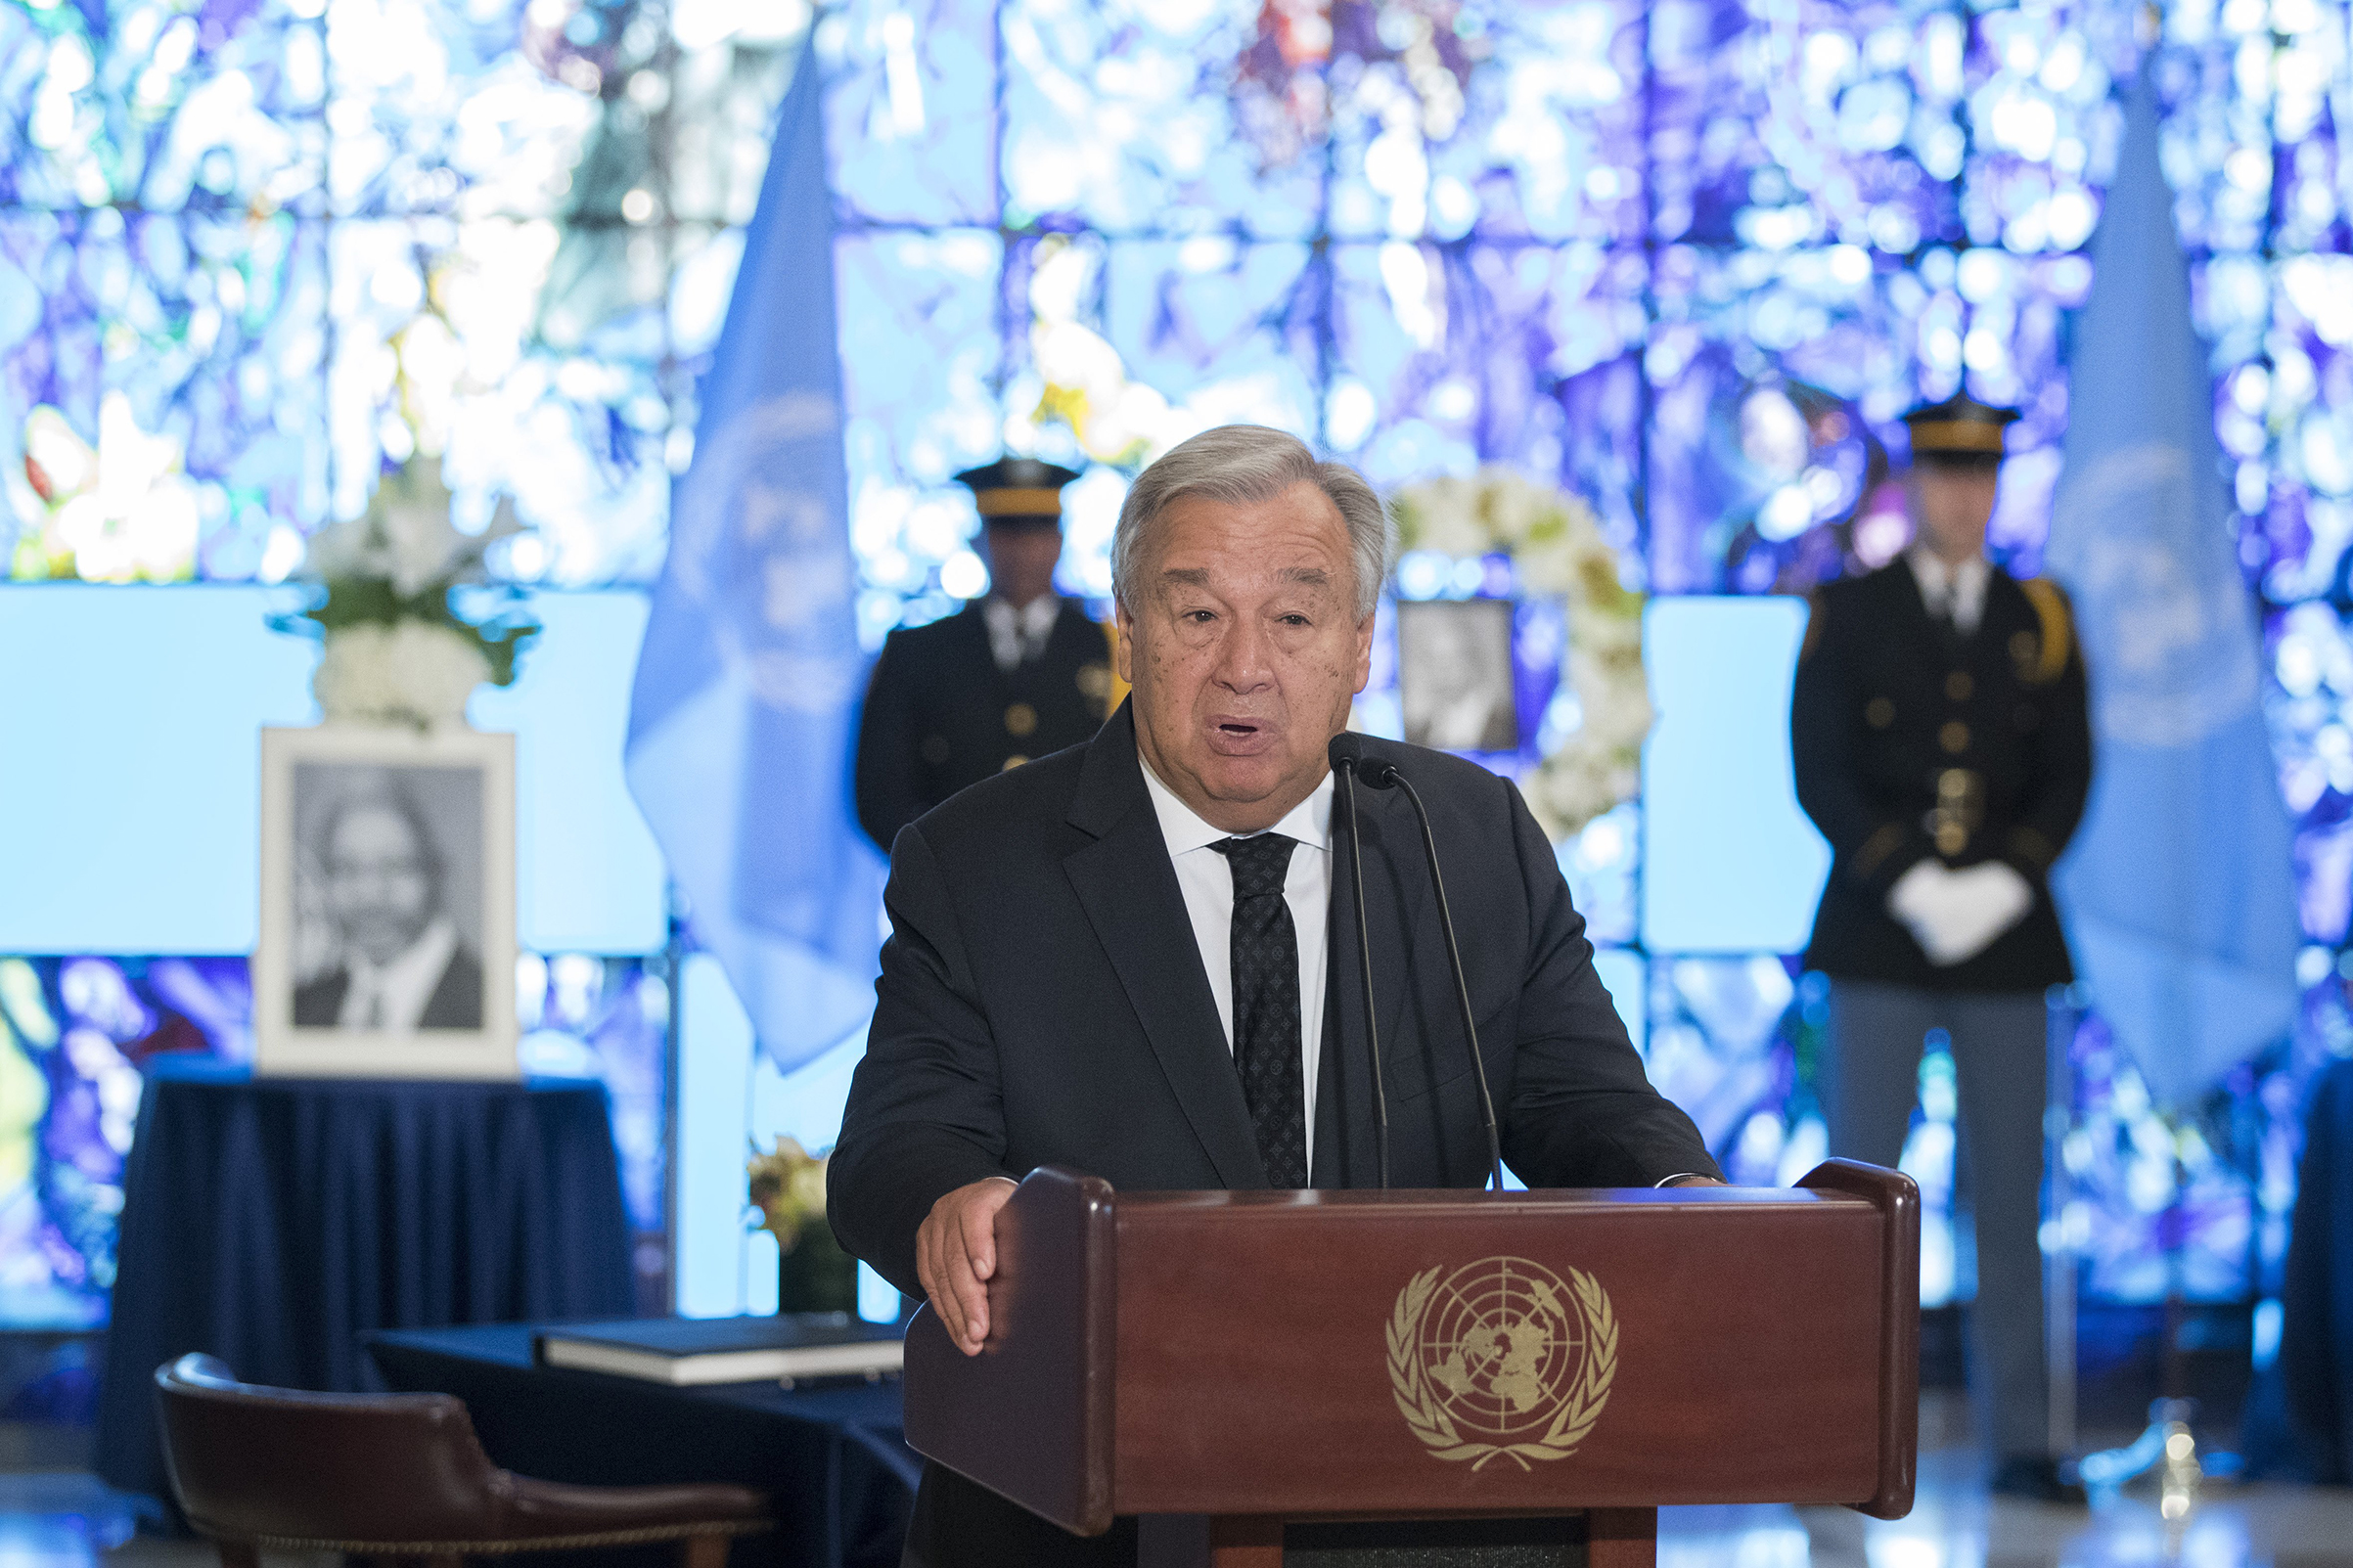 United Nations Secretary-General Antonio Guterres delivers his remarks after signing a book of condolences in memory of the late former Secretary-General Kofi Annan, on Aug 22, 2018 at the UN headquarters in New York. (Xinhua/Sipa USA)